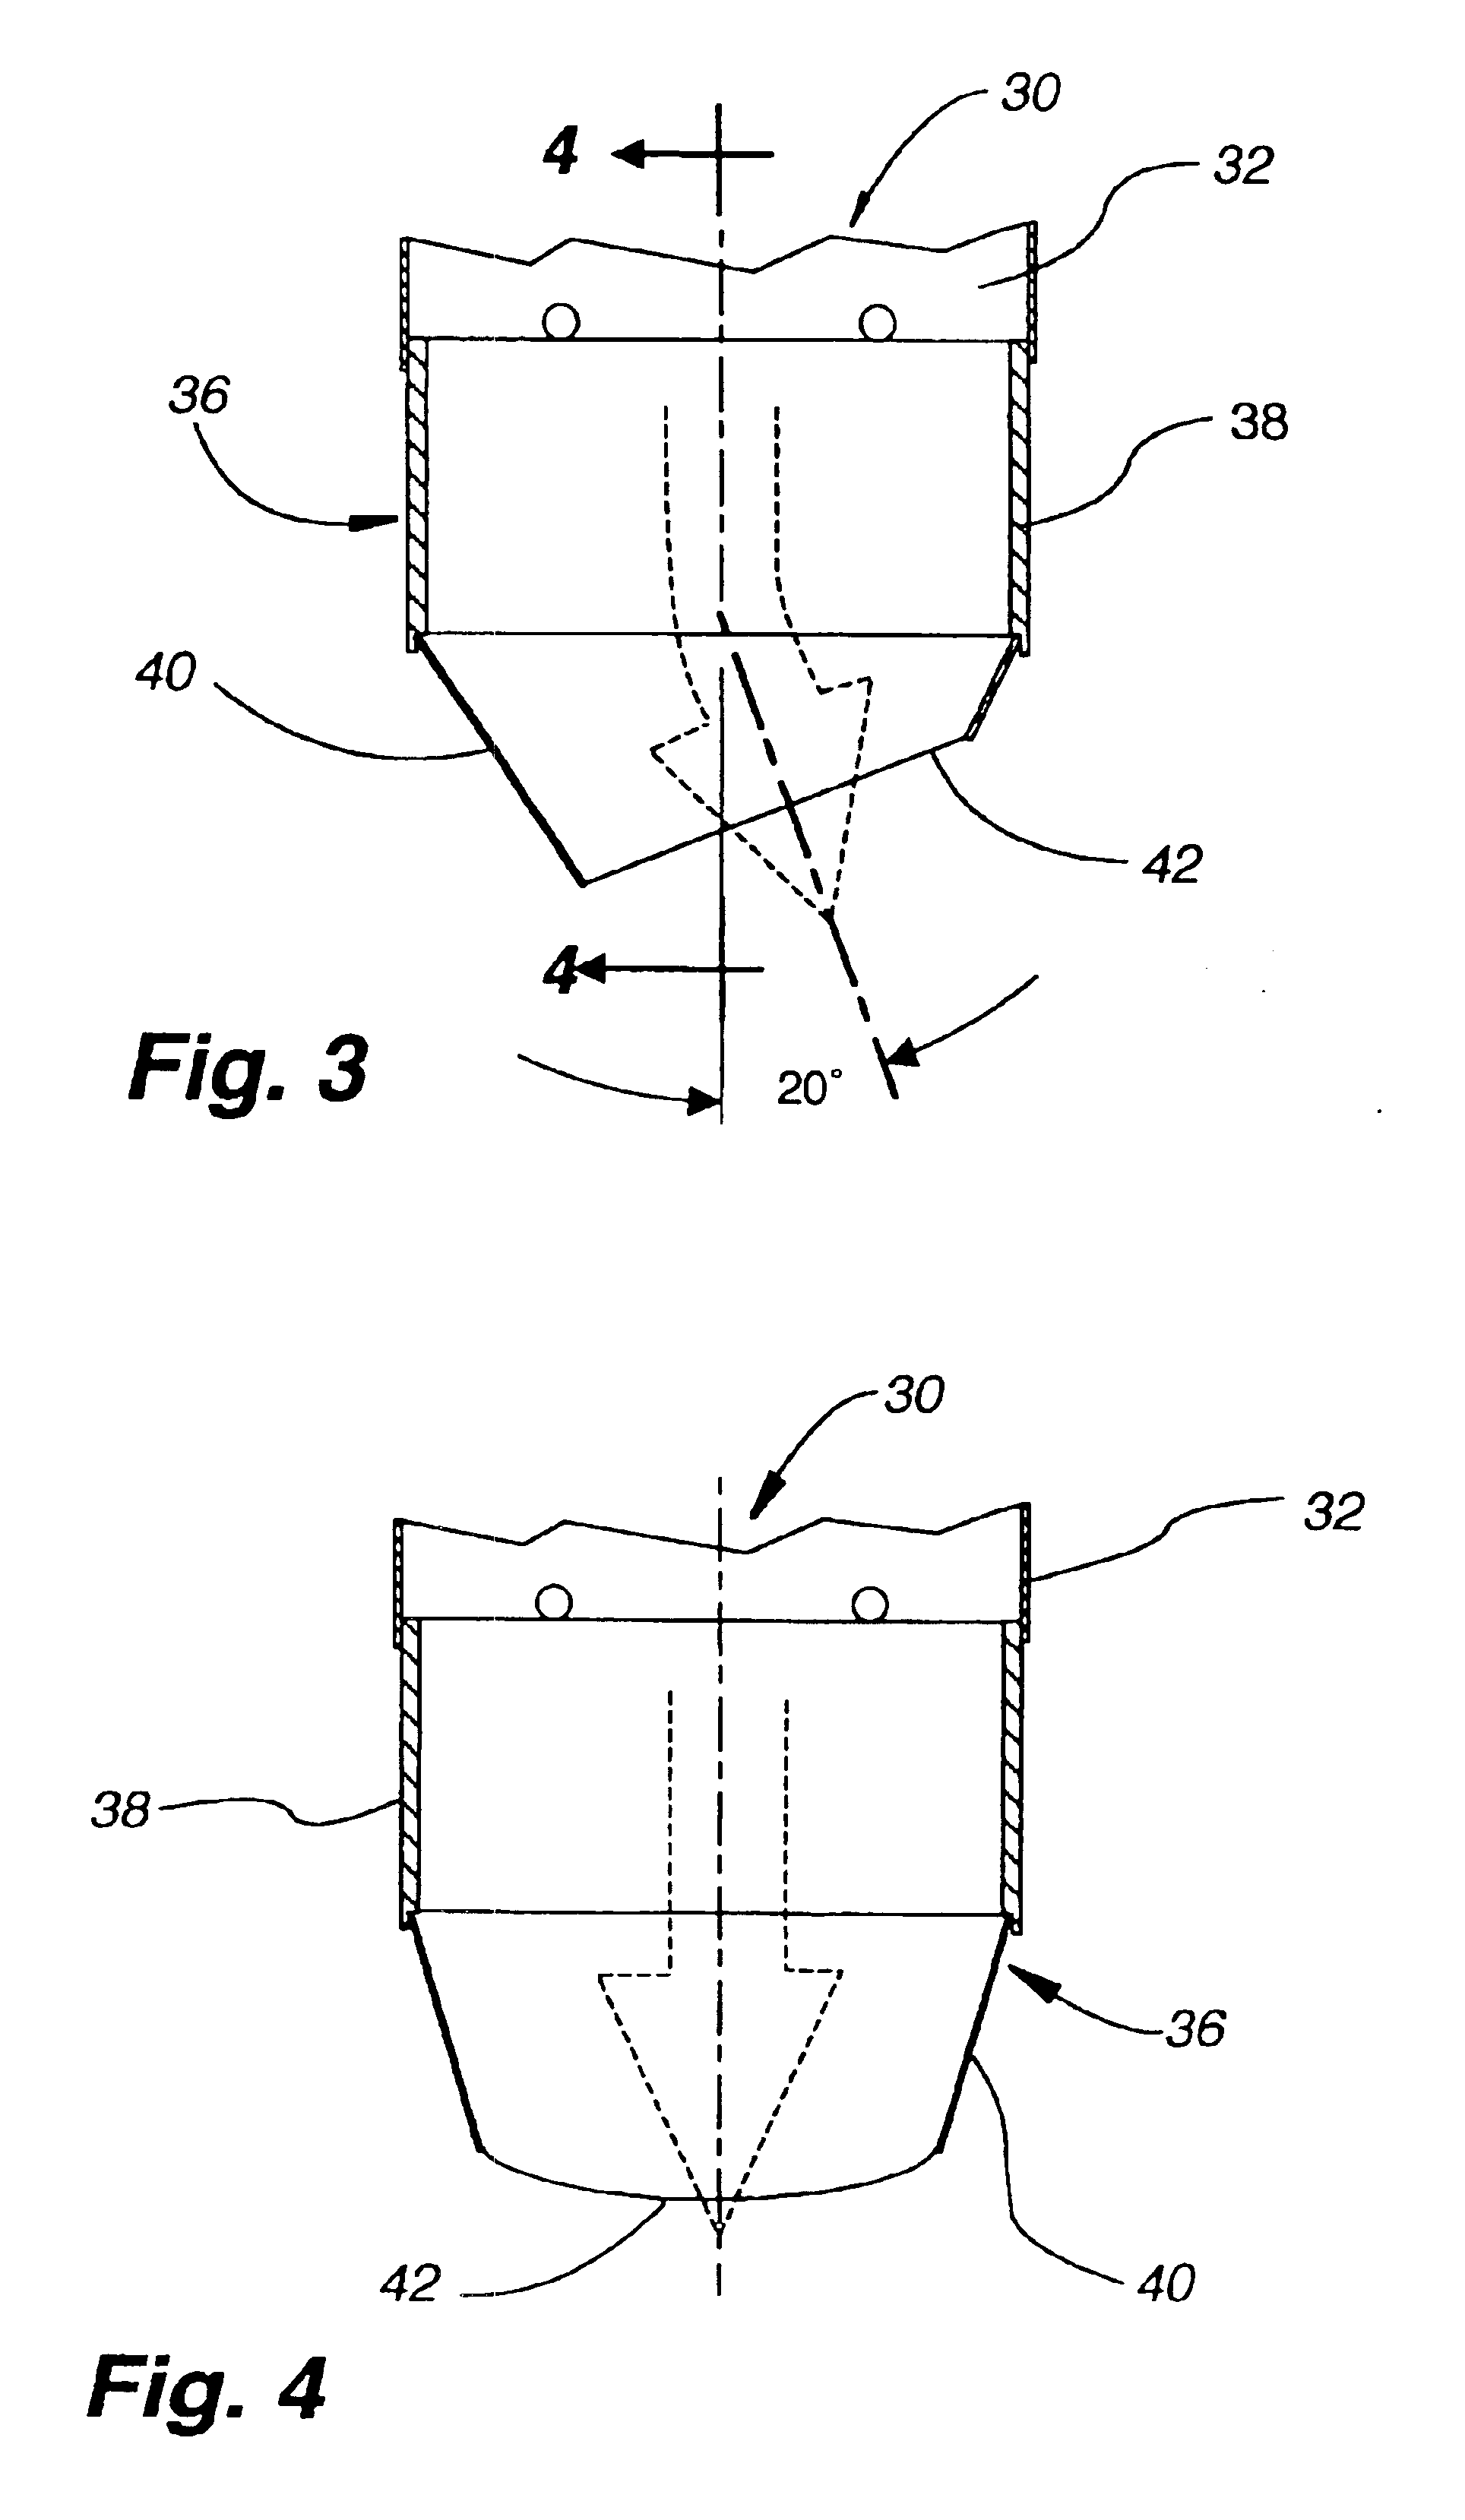 Pivotal dryer nozzle for car wash equipment and methods for drying vehicles